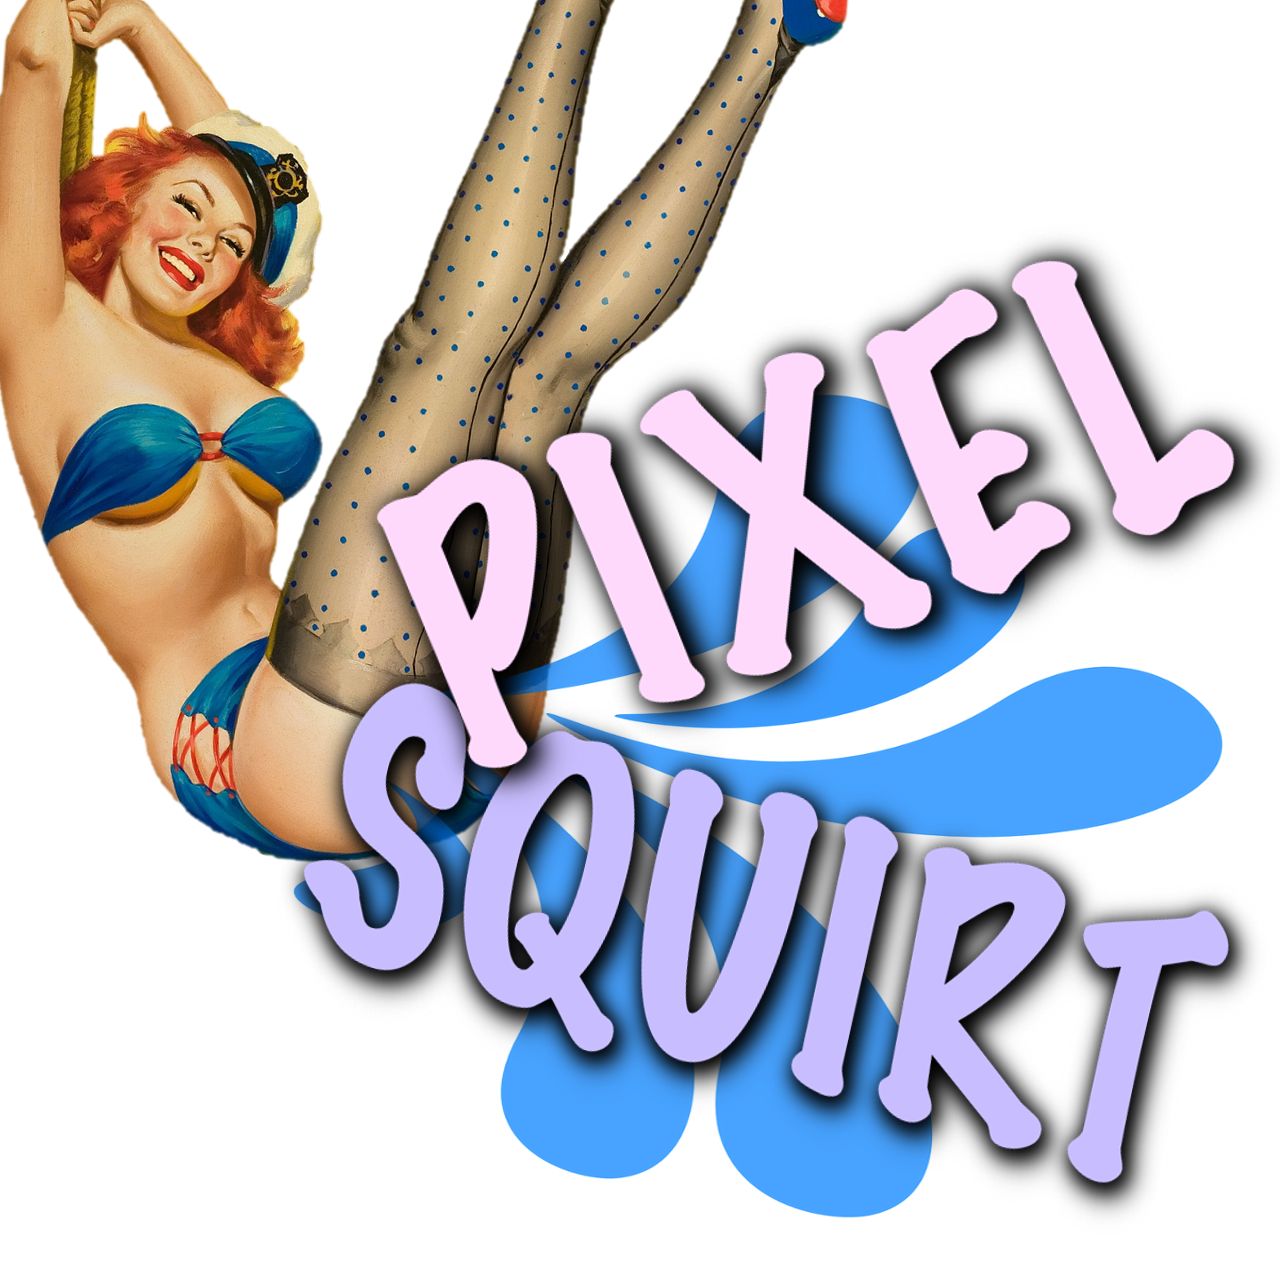 The S. reccomend pixel squirt episode blue